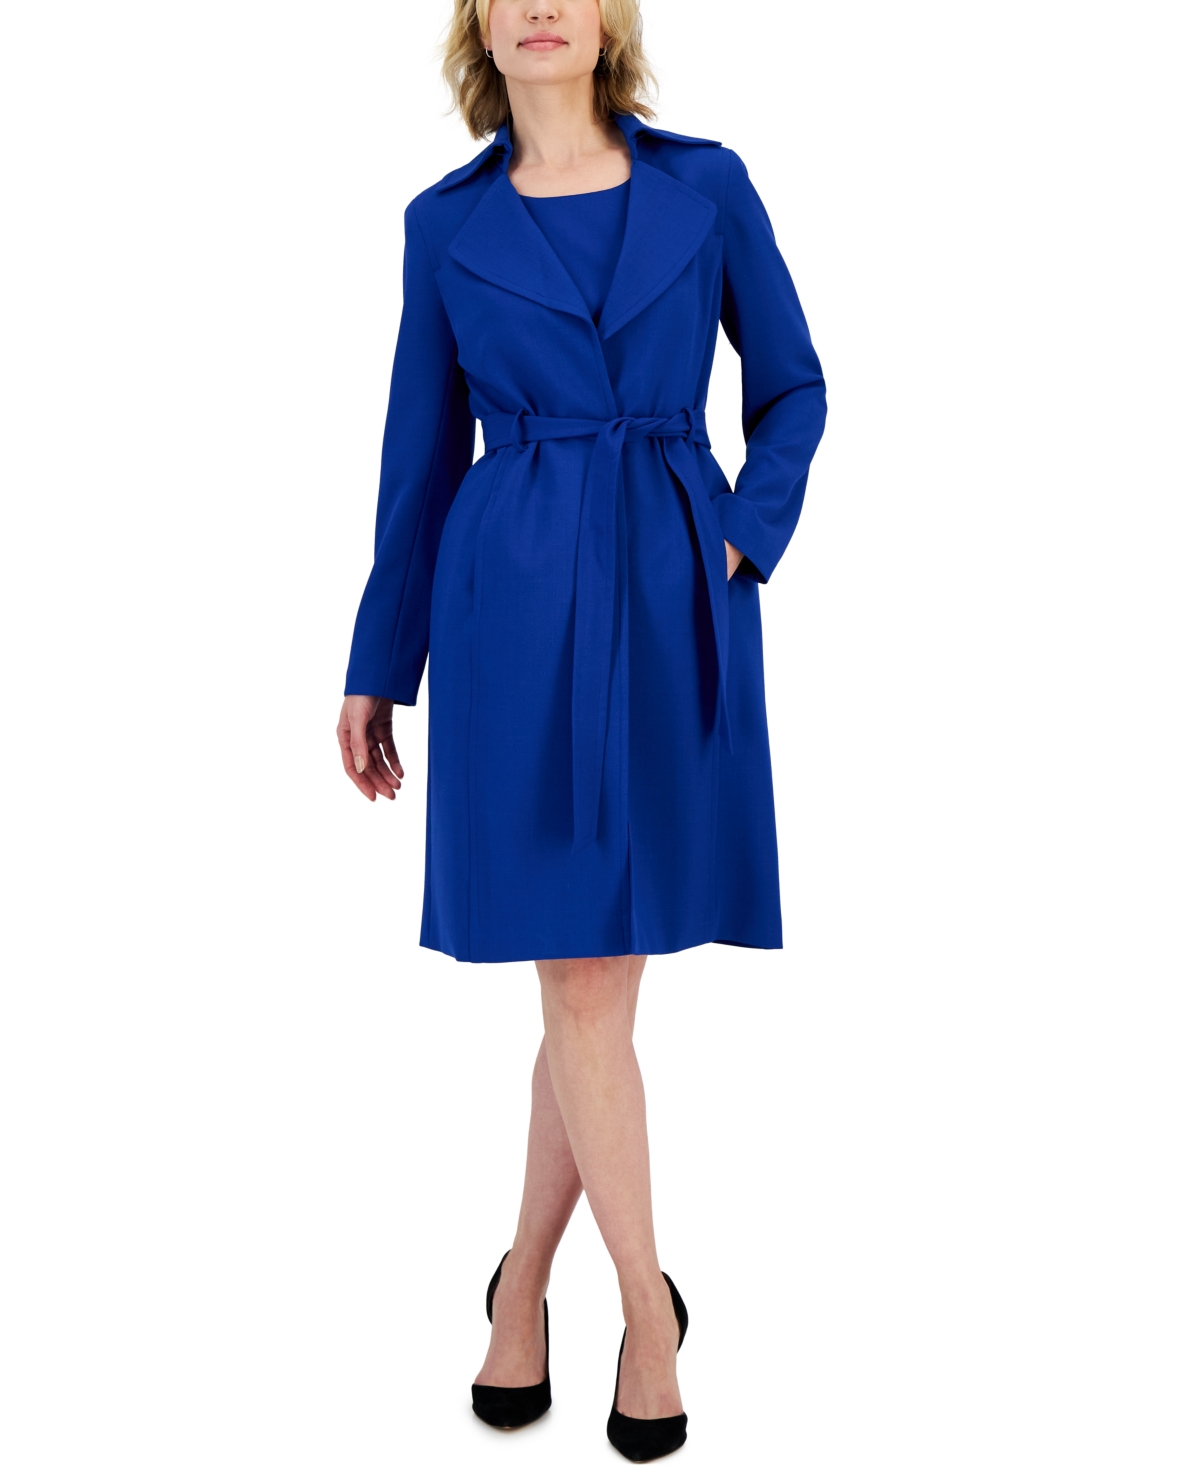 Le Suit Women's Crepe Belted Trench Jacket & Sheath Dress Suit, Regular And Petite Sizes In Celeste Blue